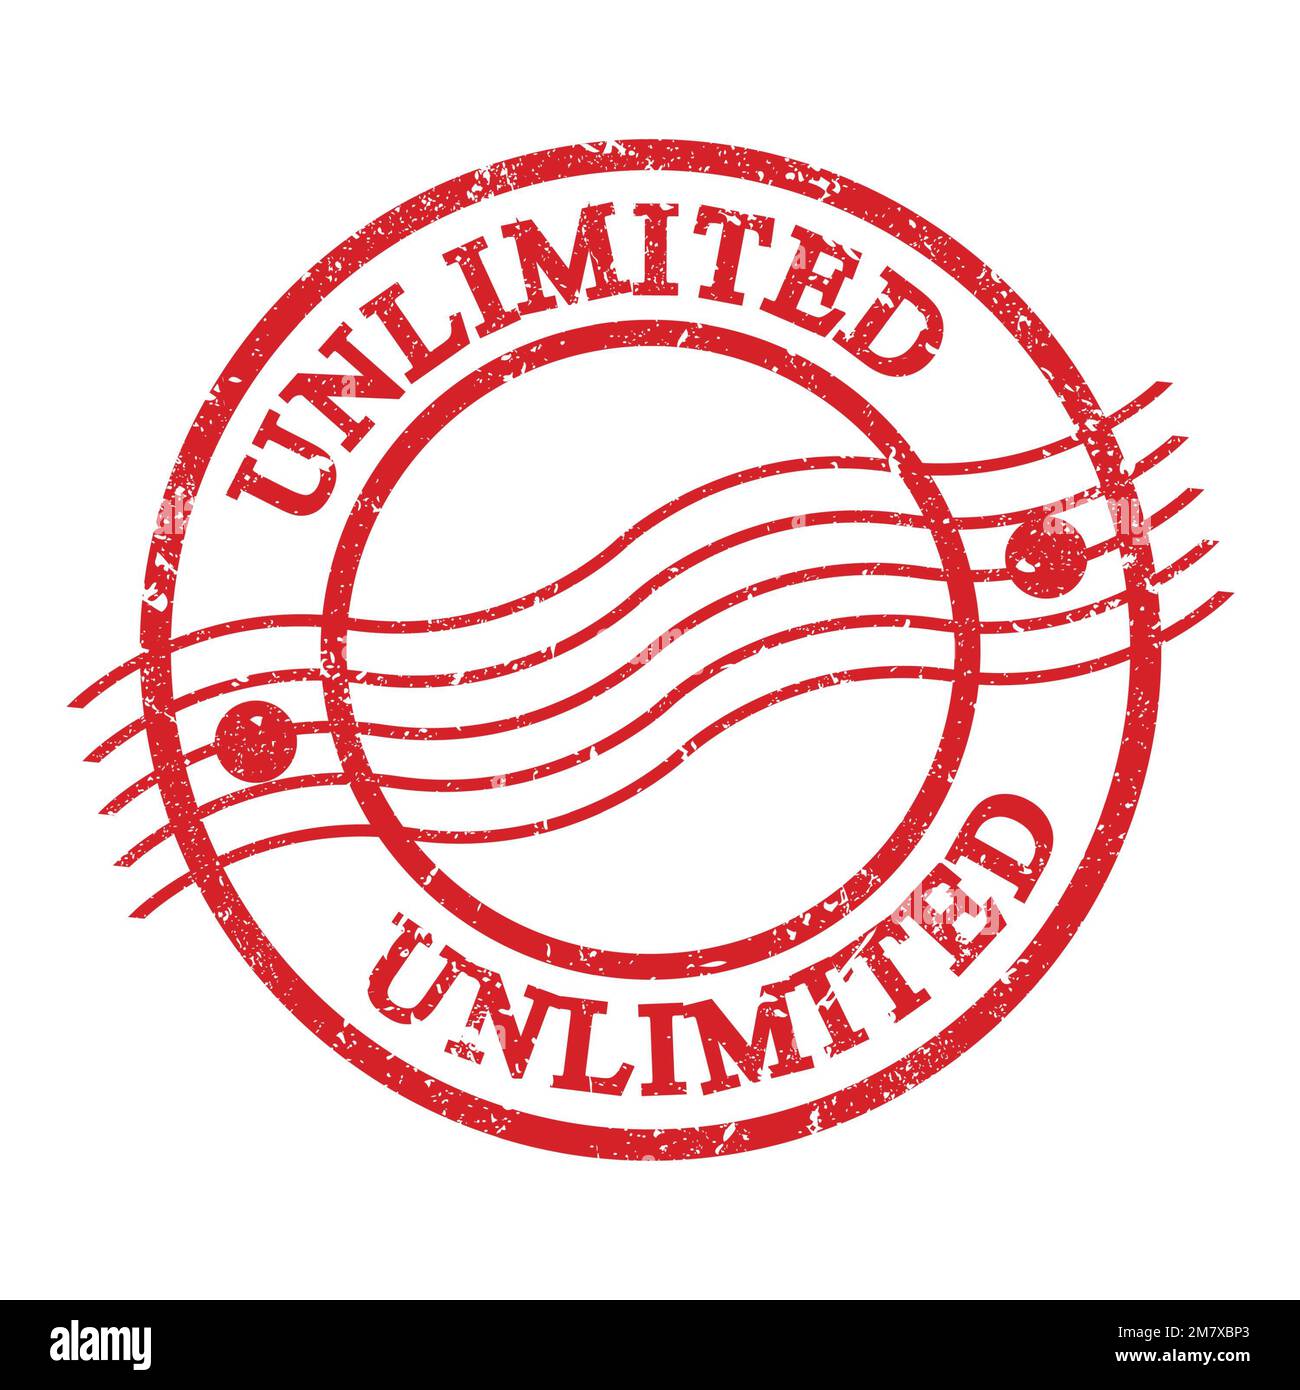 UNLIMITED, text written on red grungy postal stamp. Stock Photo